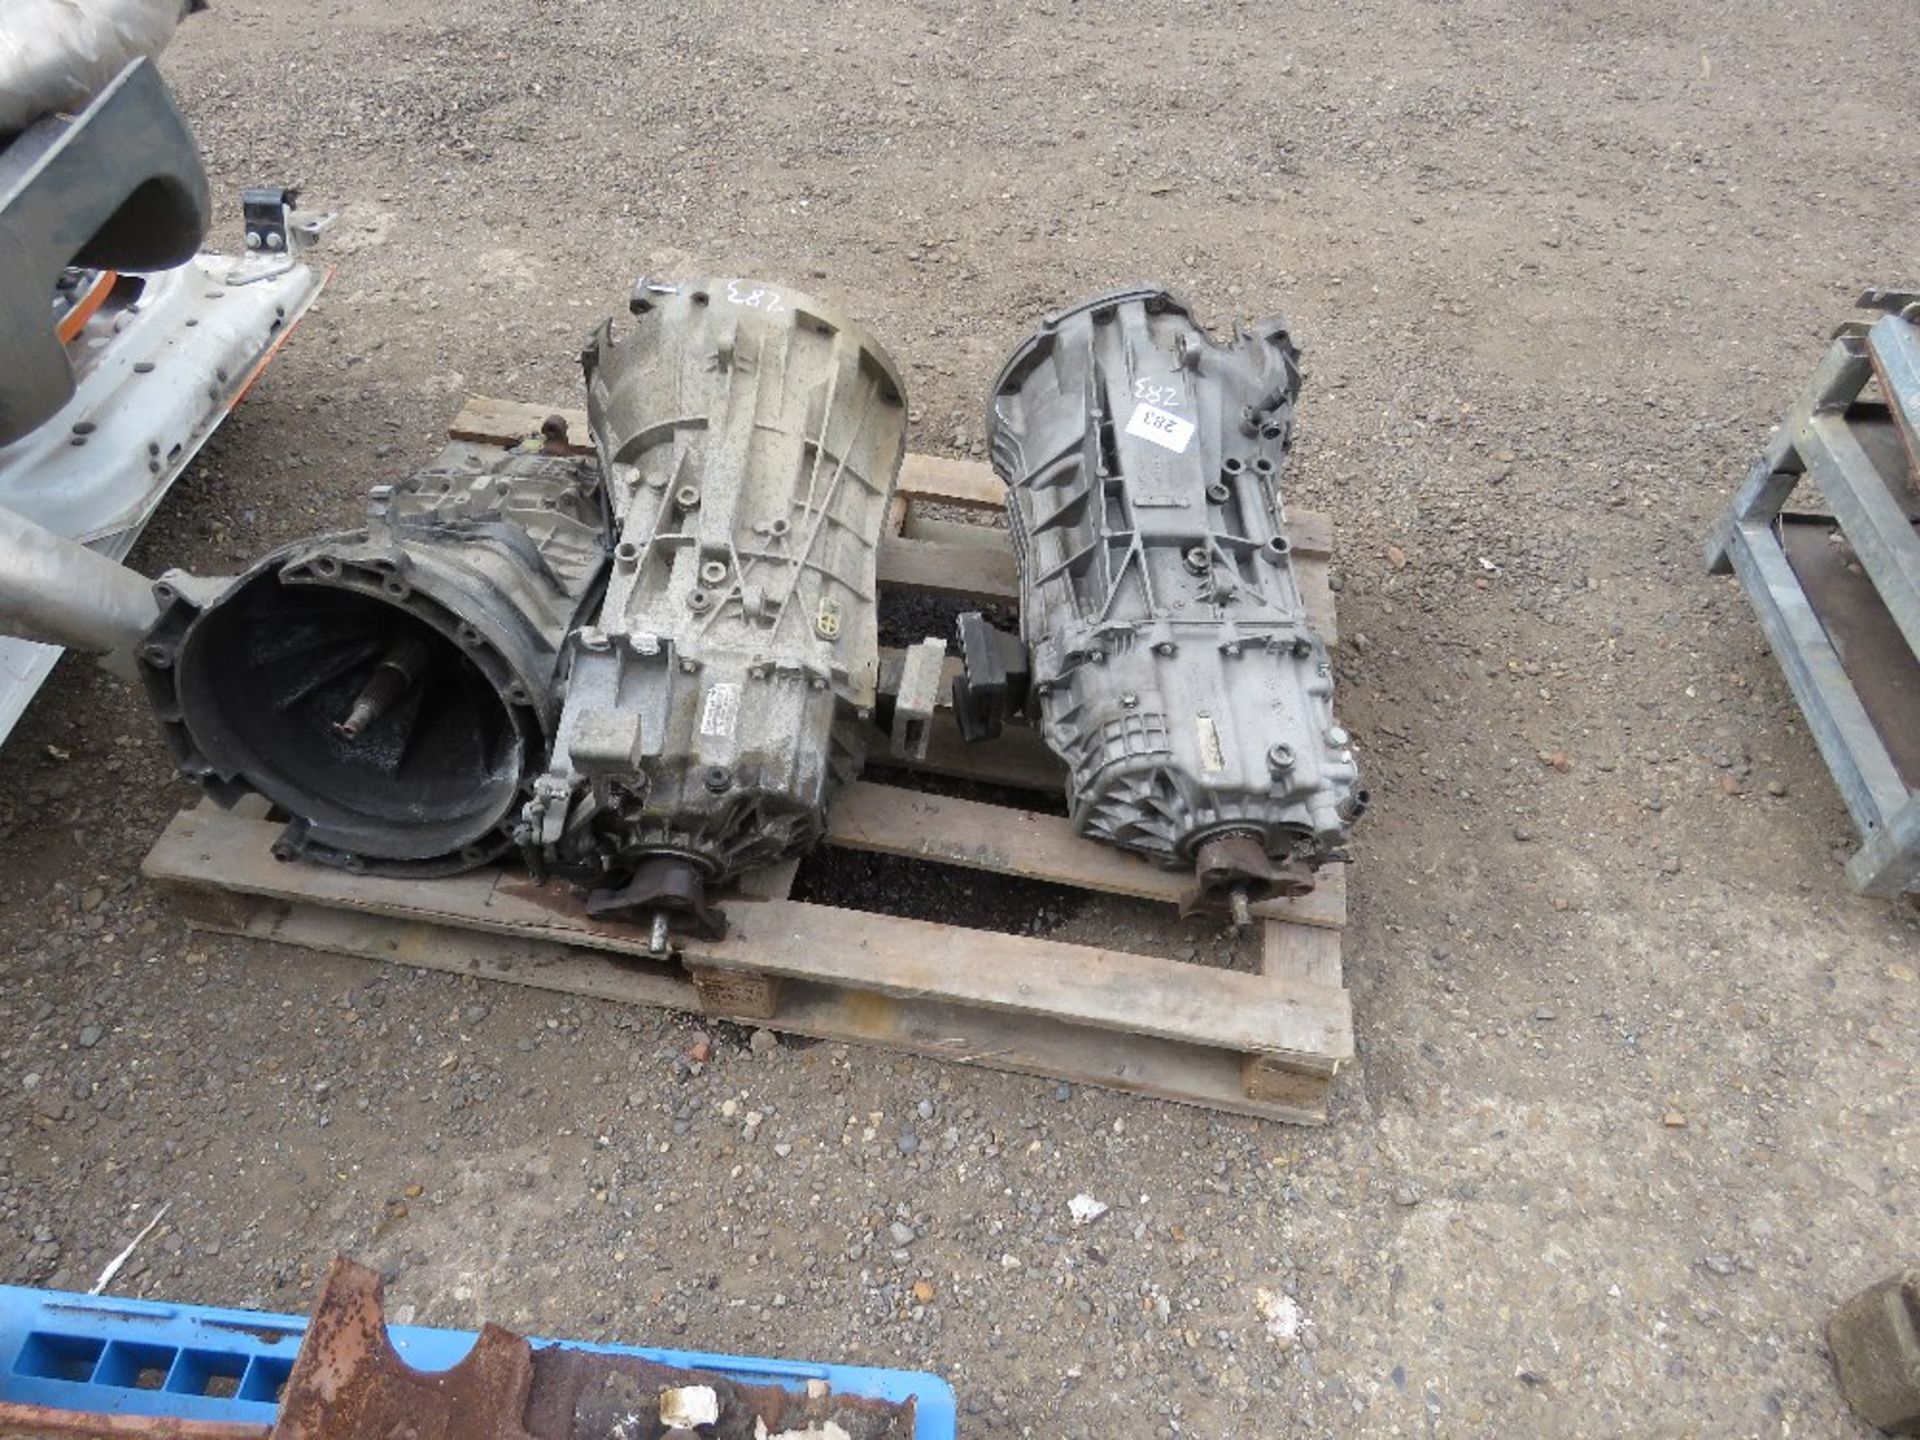 3 X GEARBOXES, BELIEVED TO BE TRANSIT TYPE. SOURCED FROM DEPOT CLOSURE. - Image 3 of 3